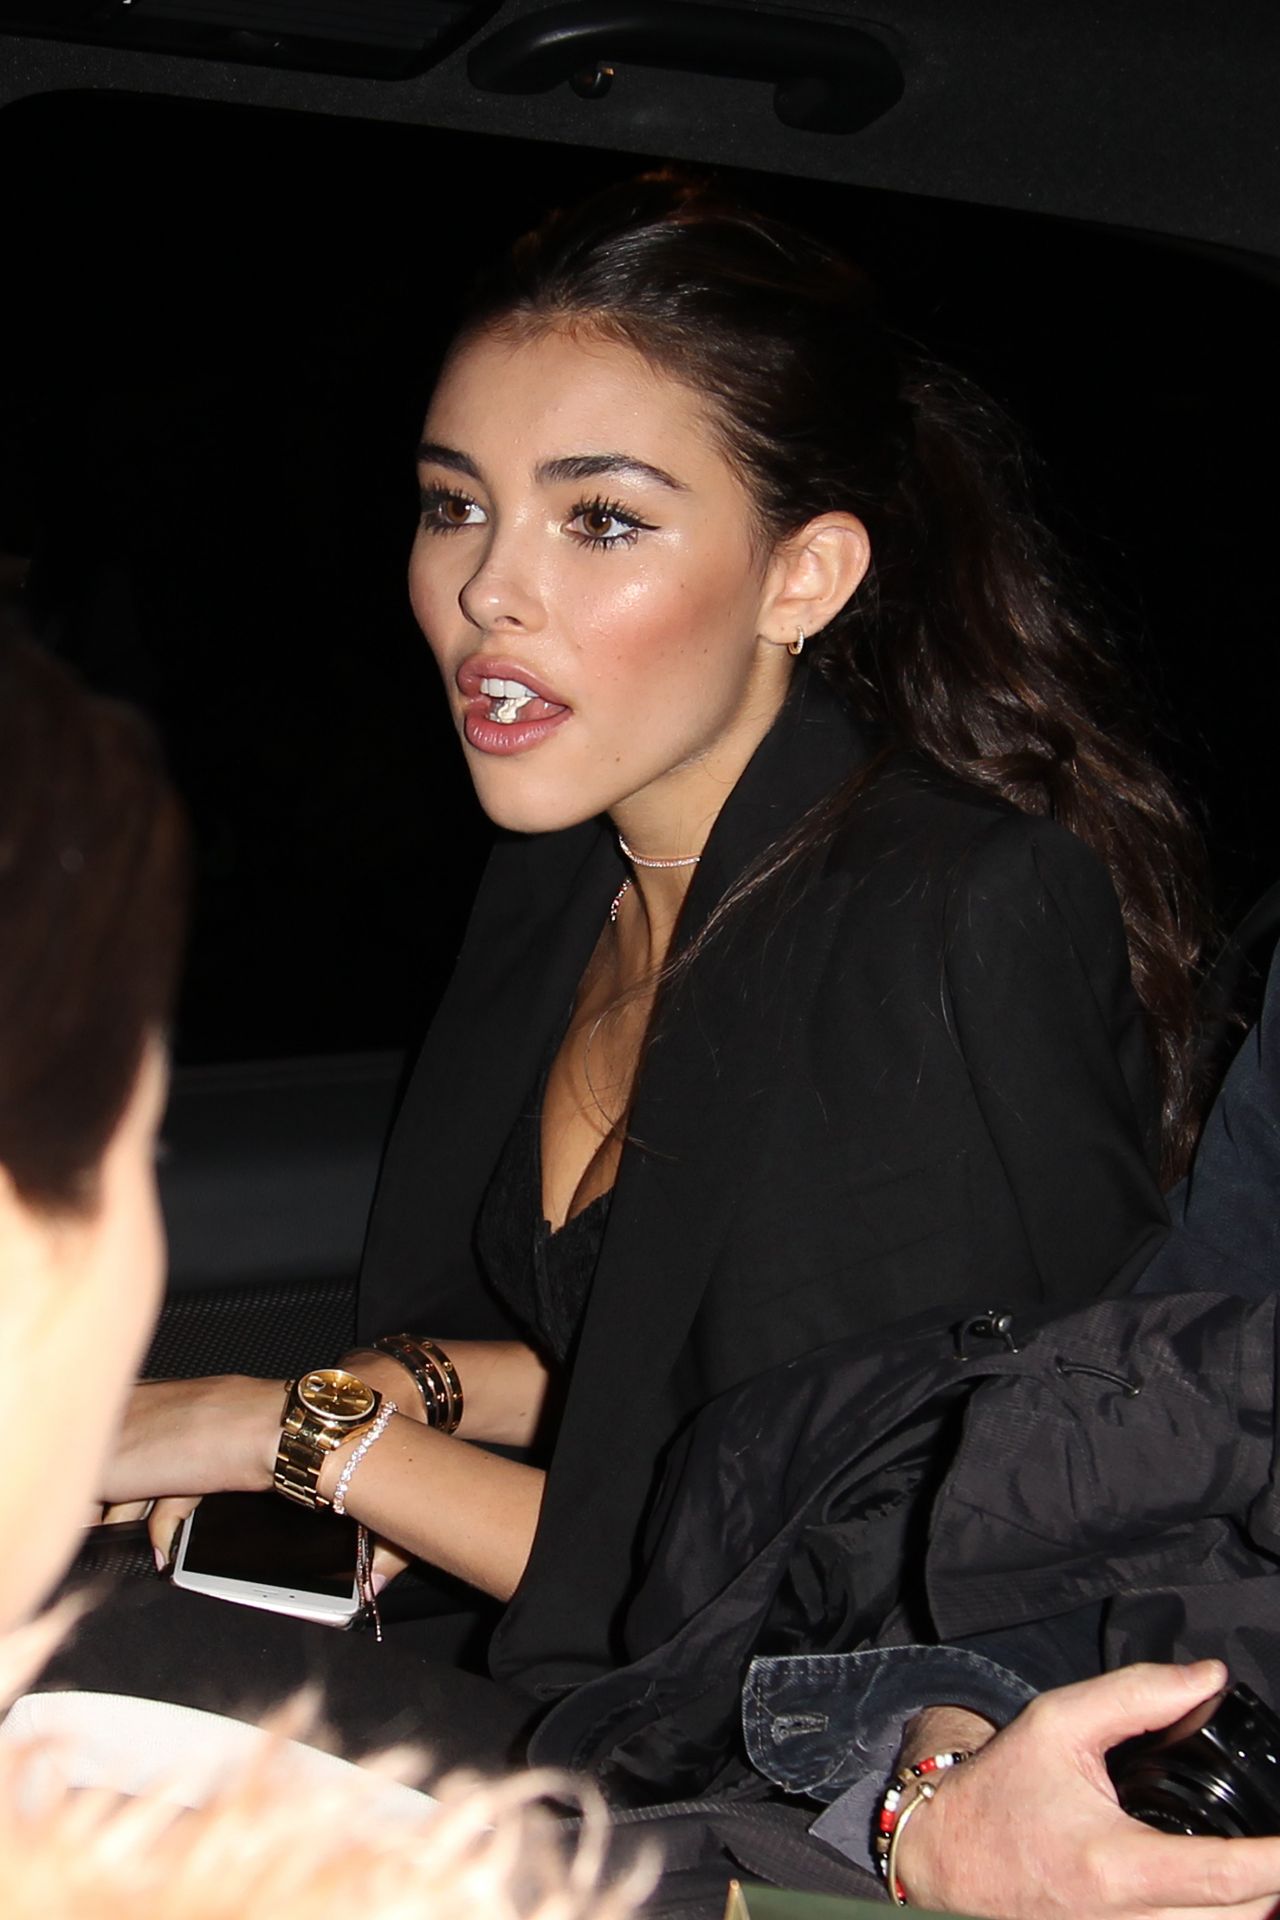 Madison Beer - Leaving Her Hotel in Milan, Italy 2/27/ 2017